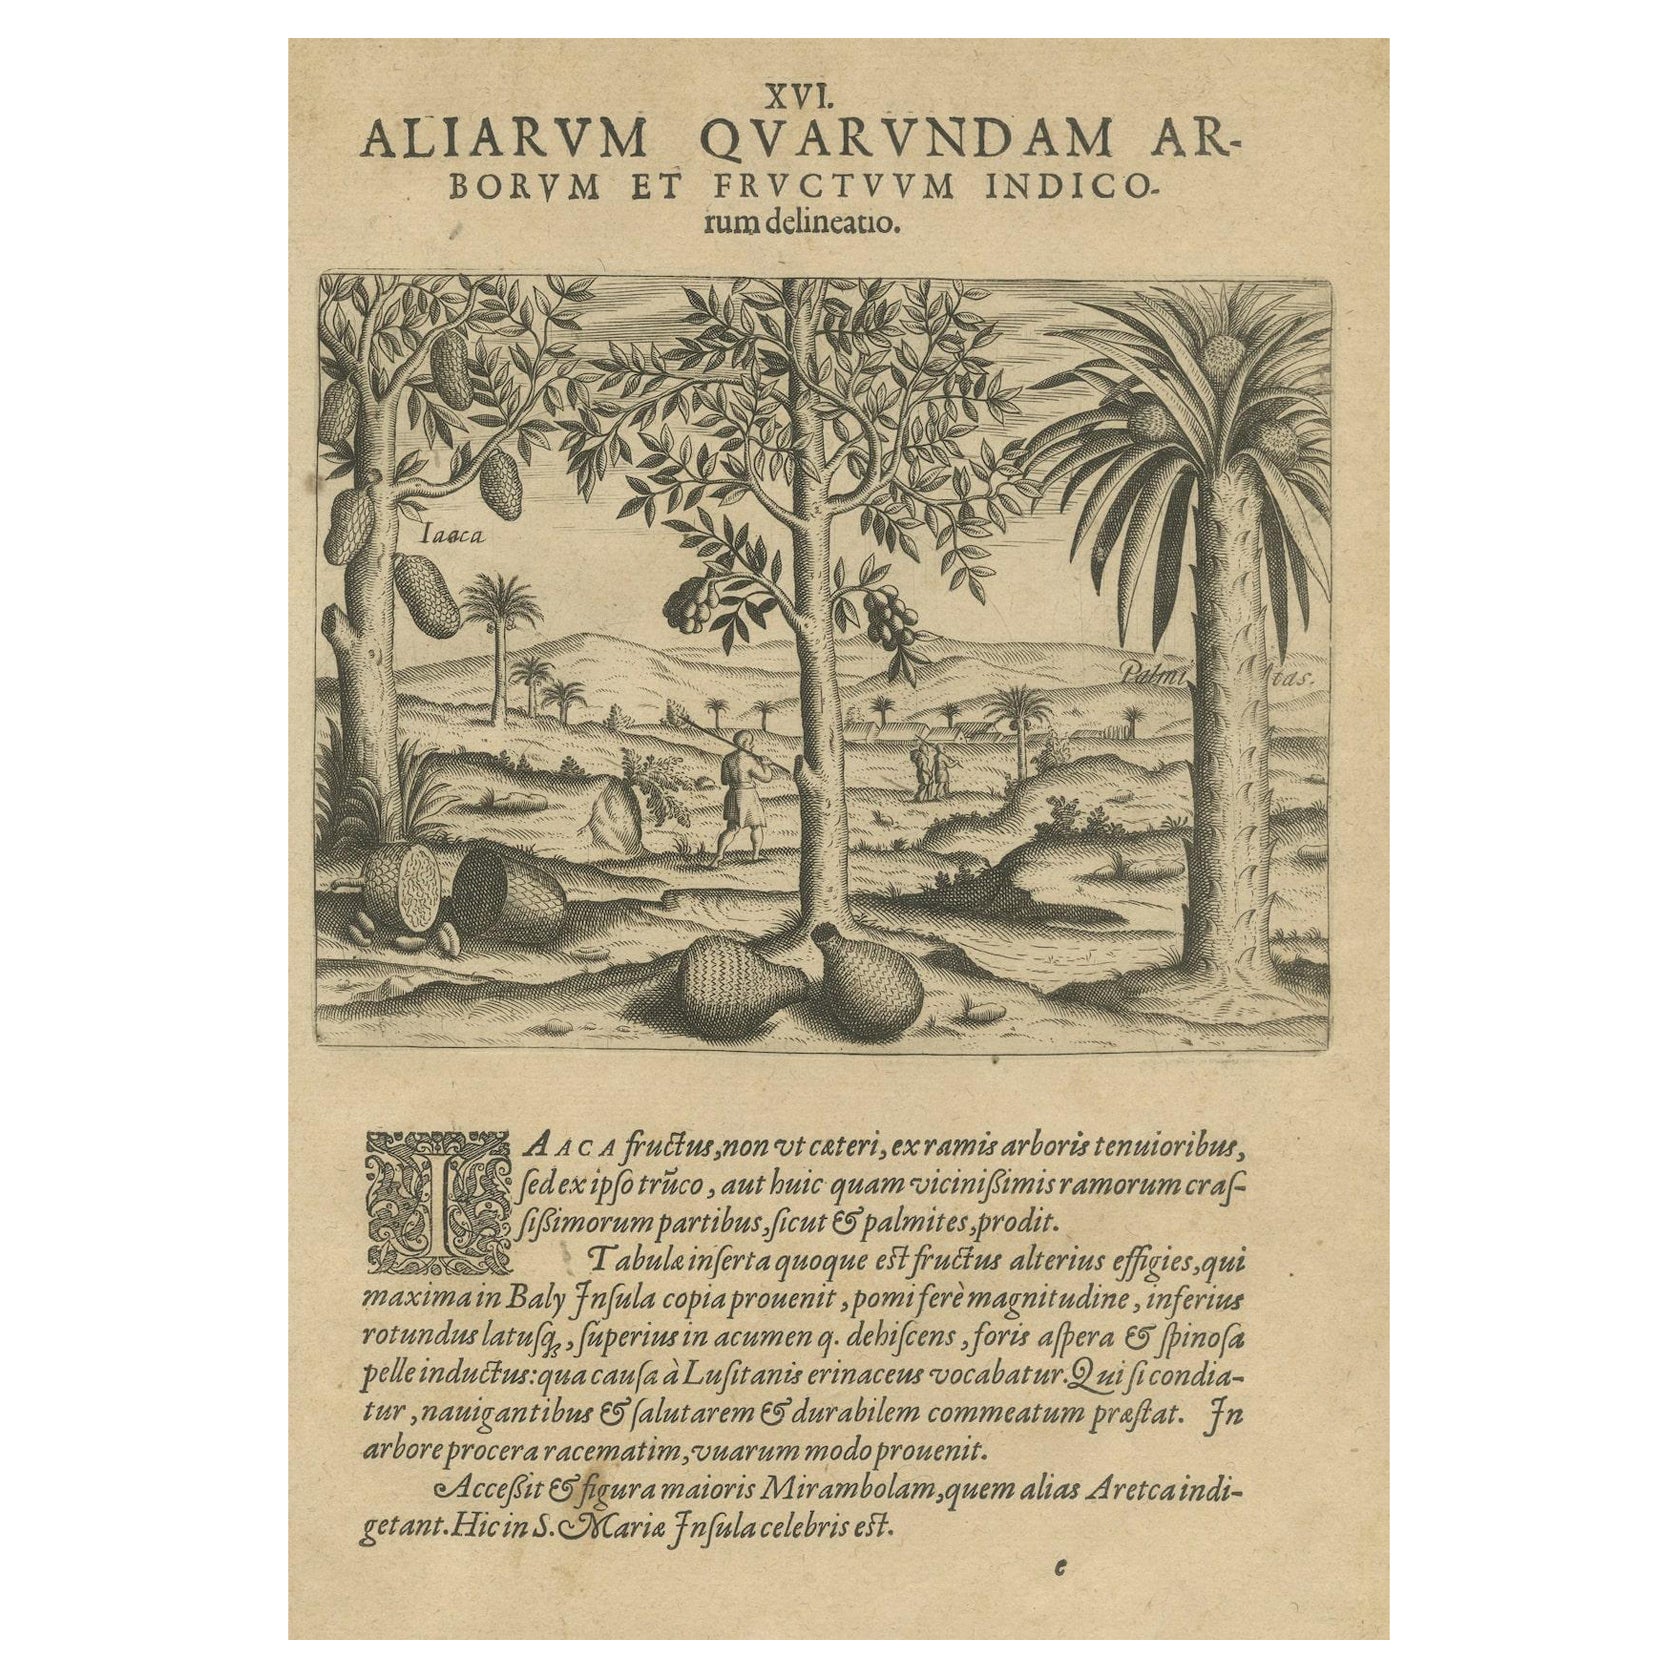 Tropical Abundance: The Jackfruit and Palm Trees in De Bry's 1601 Engraving For Sale